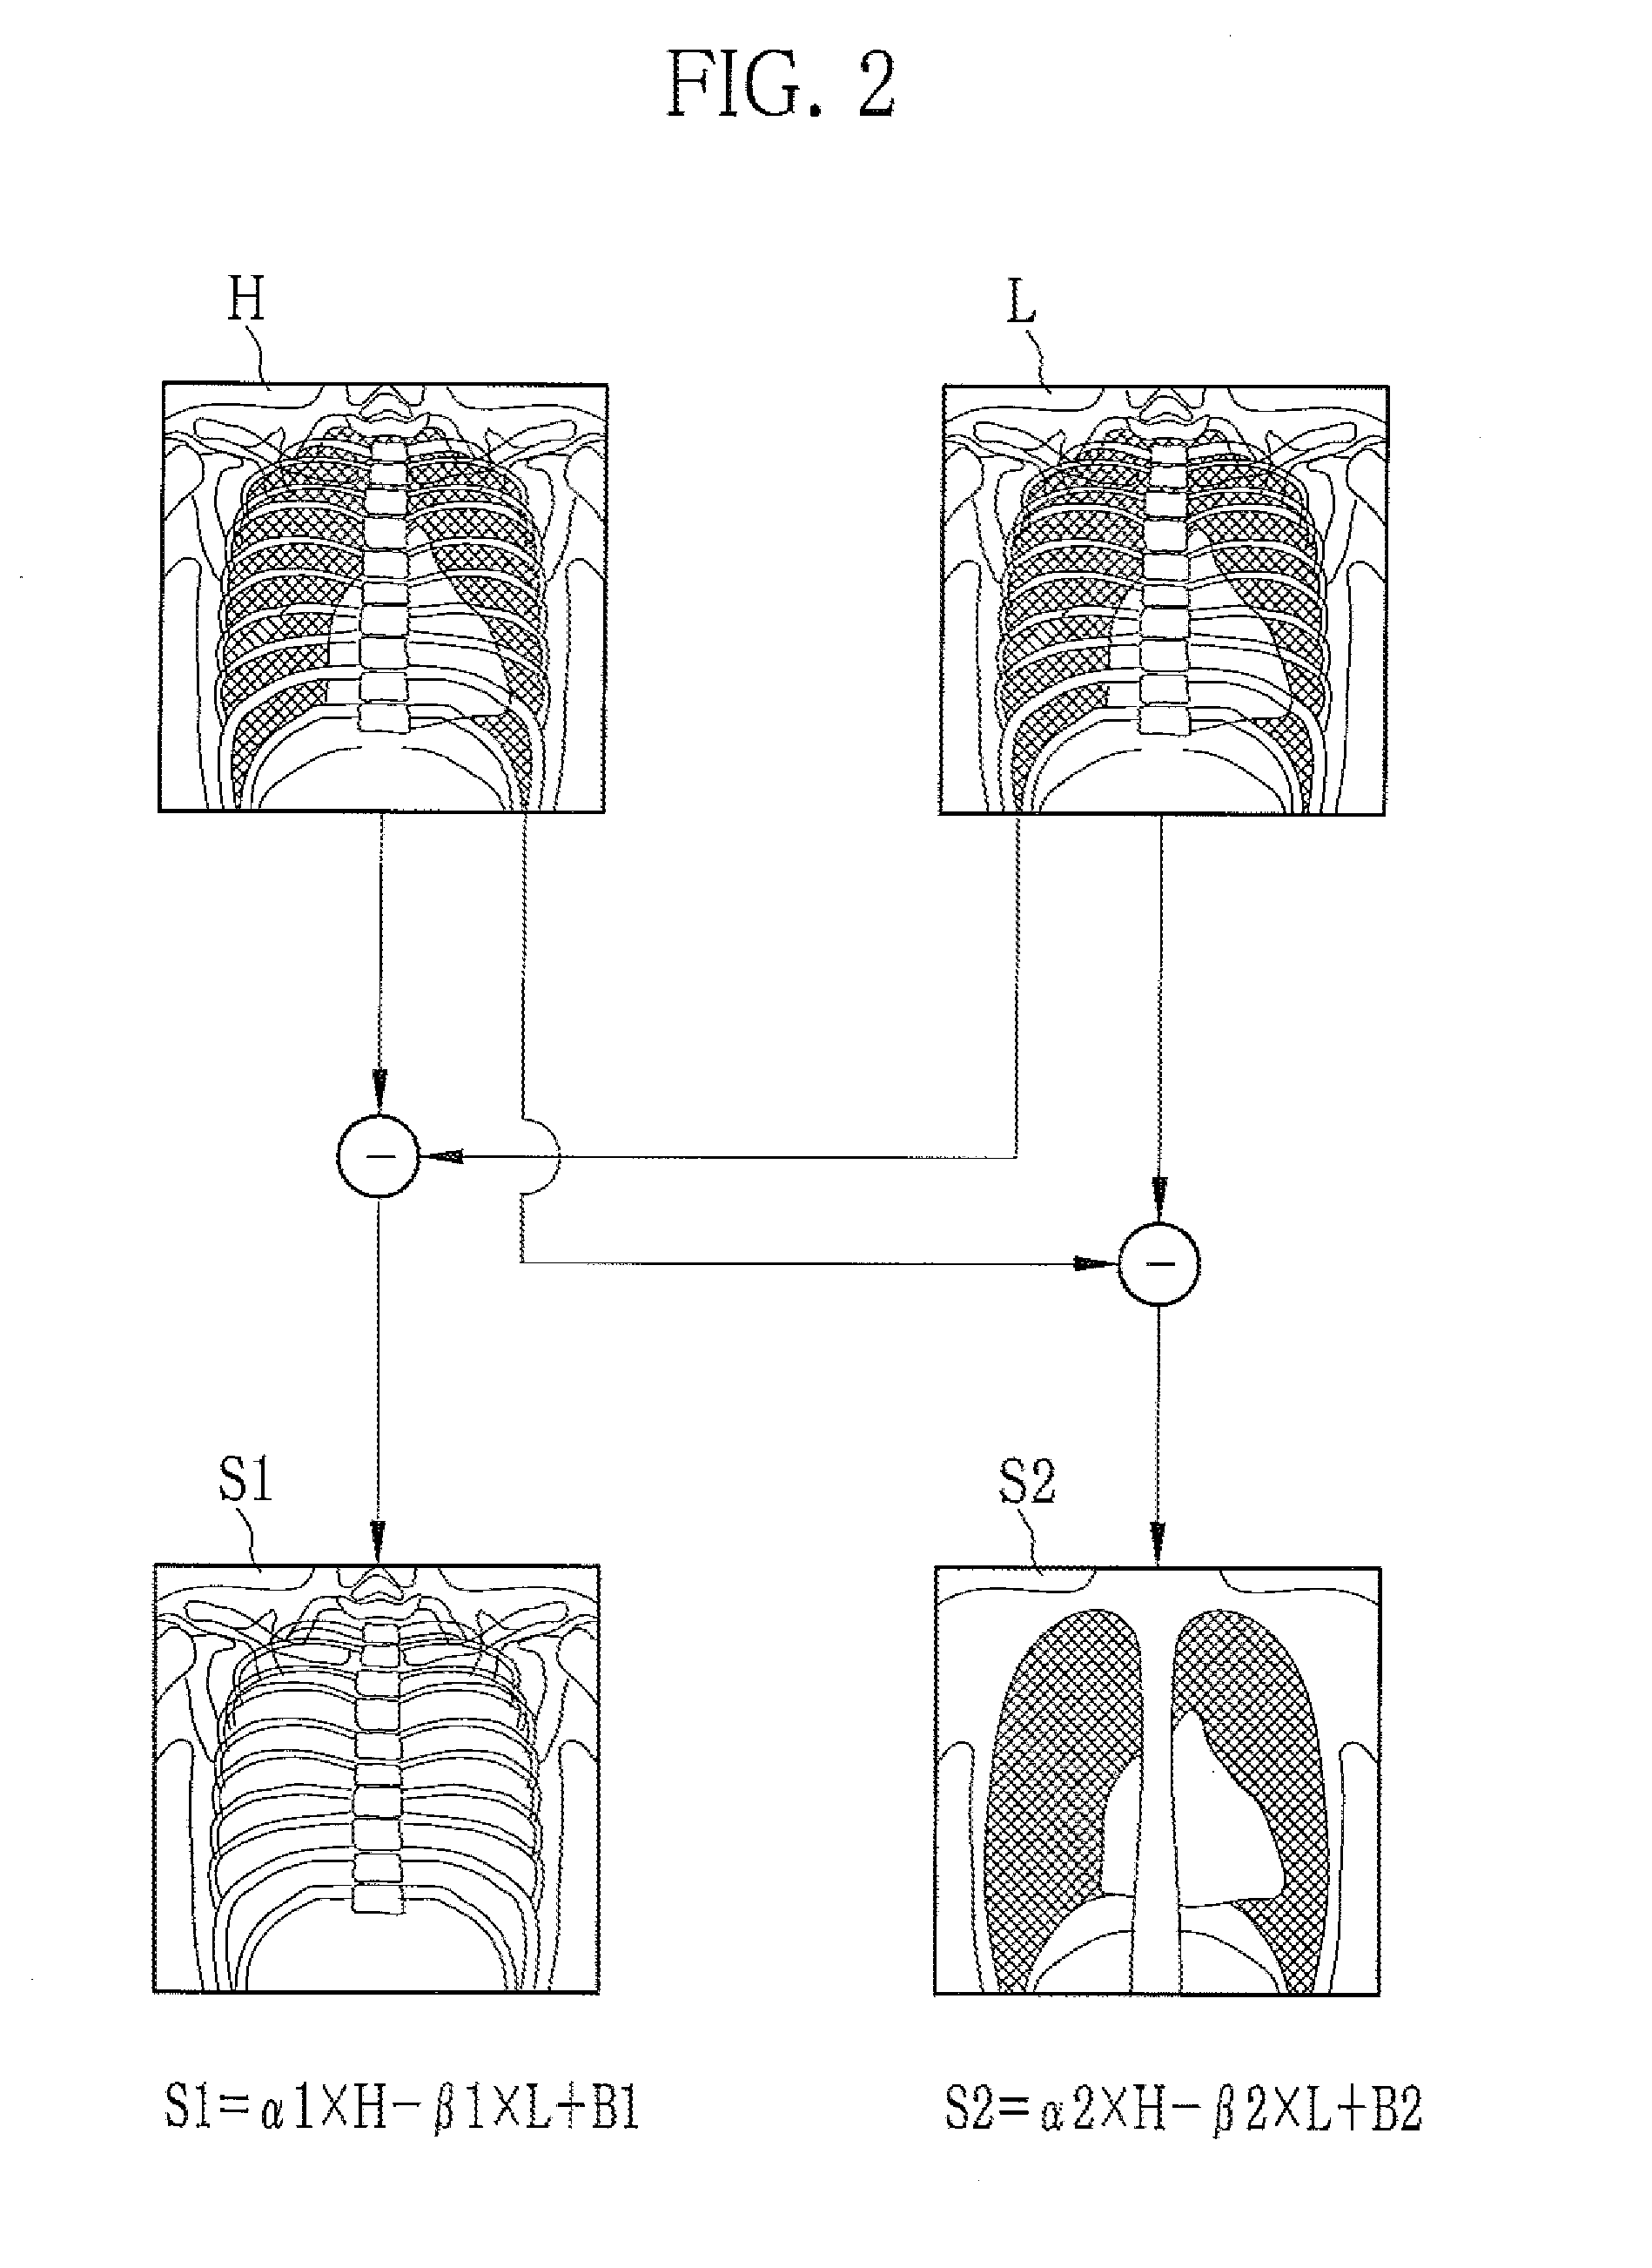 Radiation imaging apparatus and imaging control device